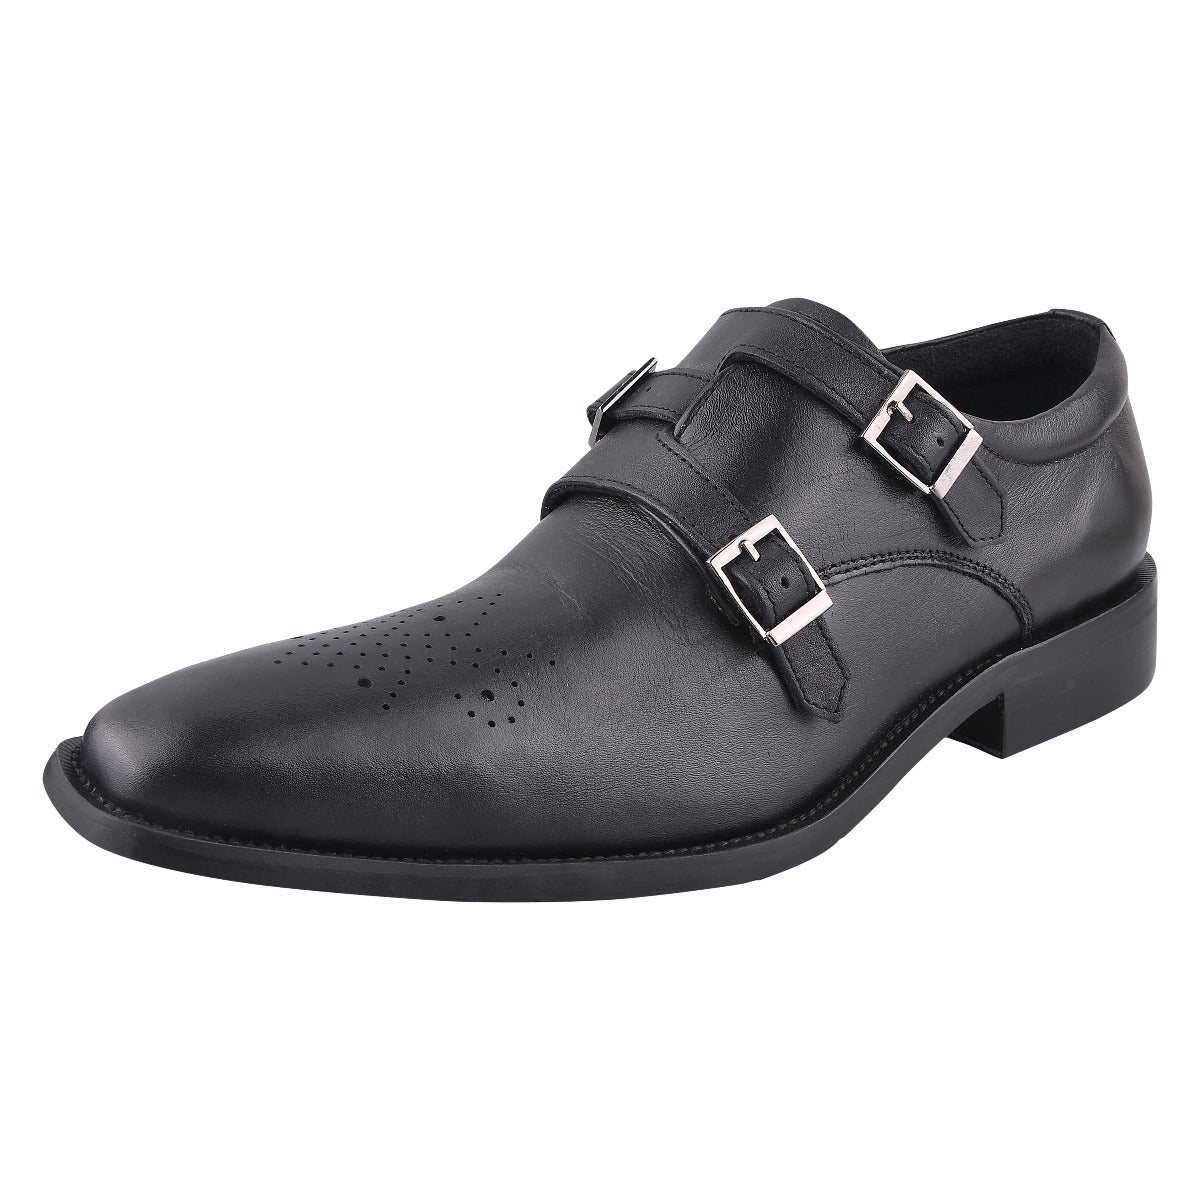 Chatswood Leather Oxford Style Monk Straps